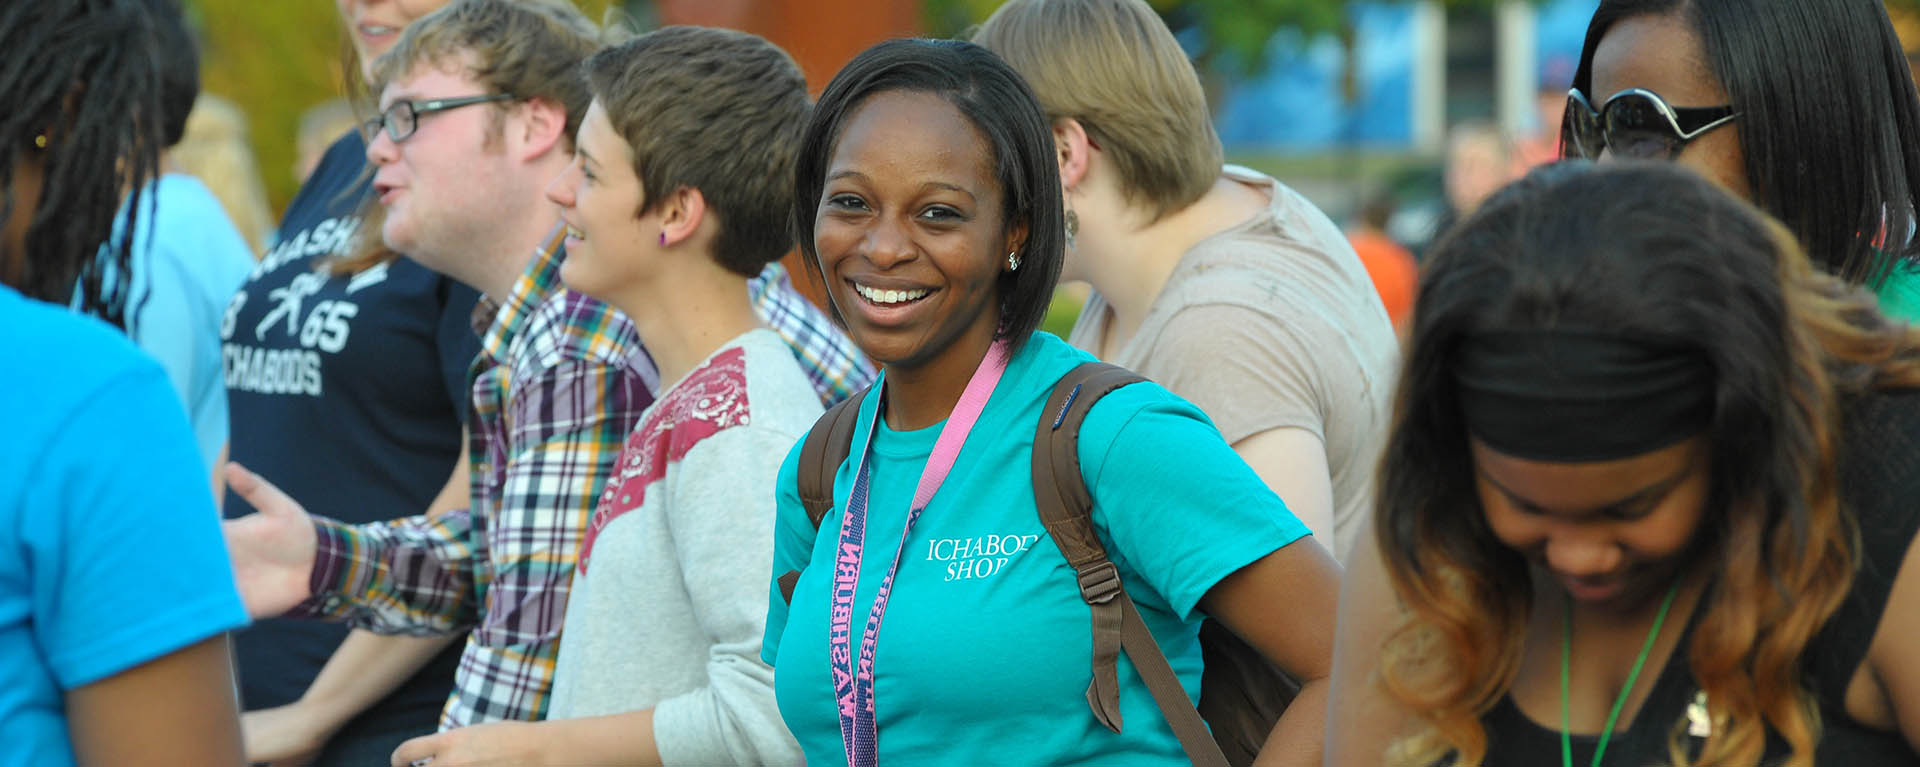 smiling female student in a crowd